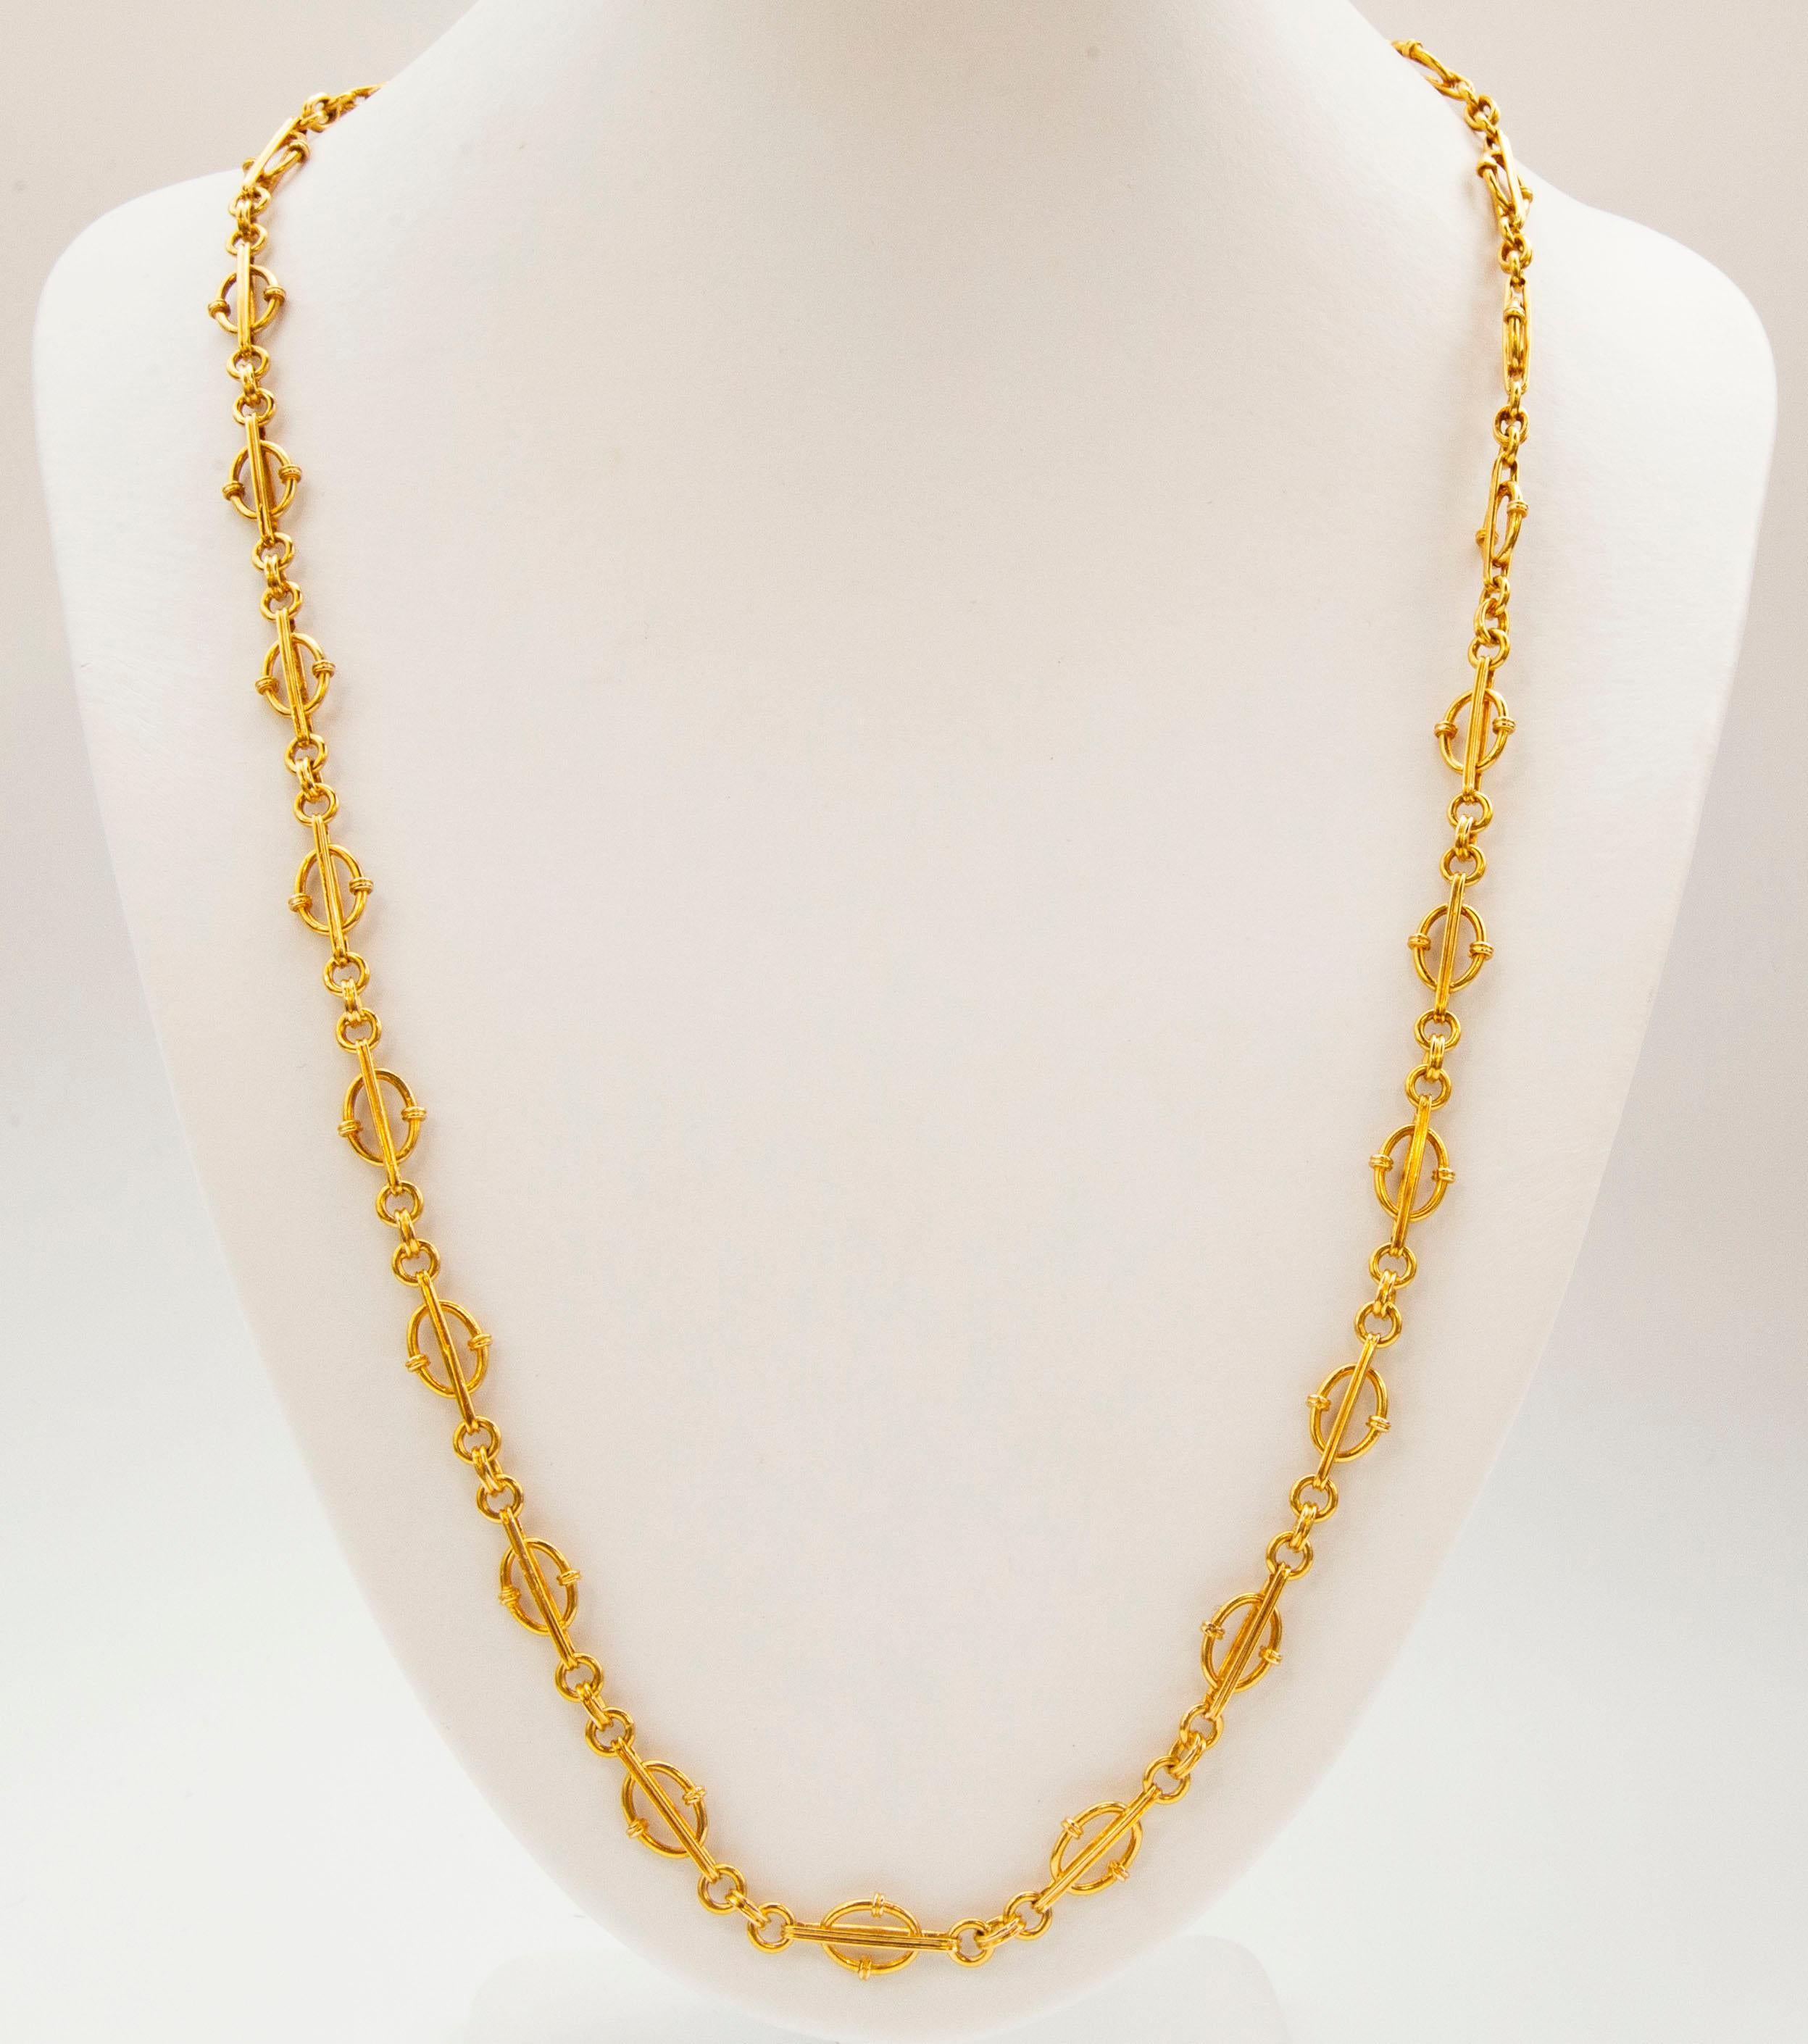 A vintage 18 karat solid yellow gold chain necklace featuring multiple units consisting of  three connected circles attached to elongated links filled with open oval frames.  The necklace has an unusual  chain design. Its color is intense and vivid